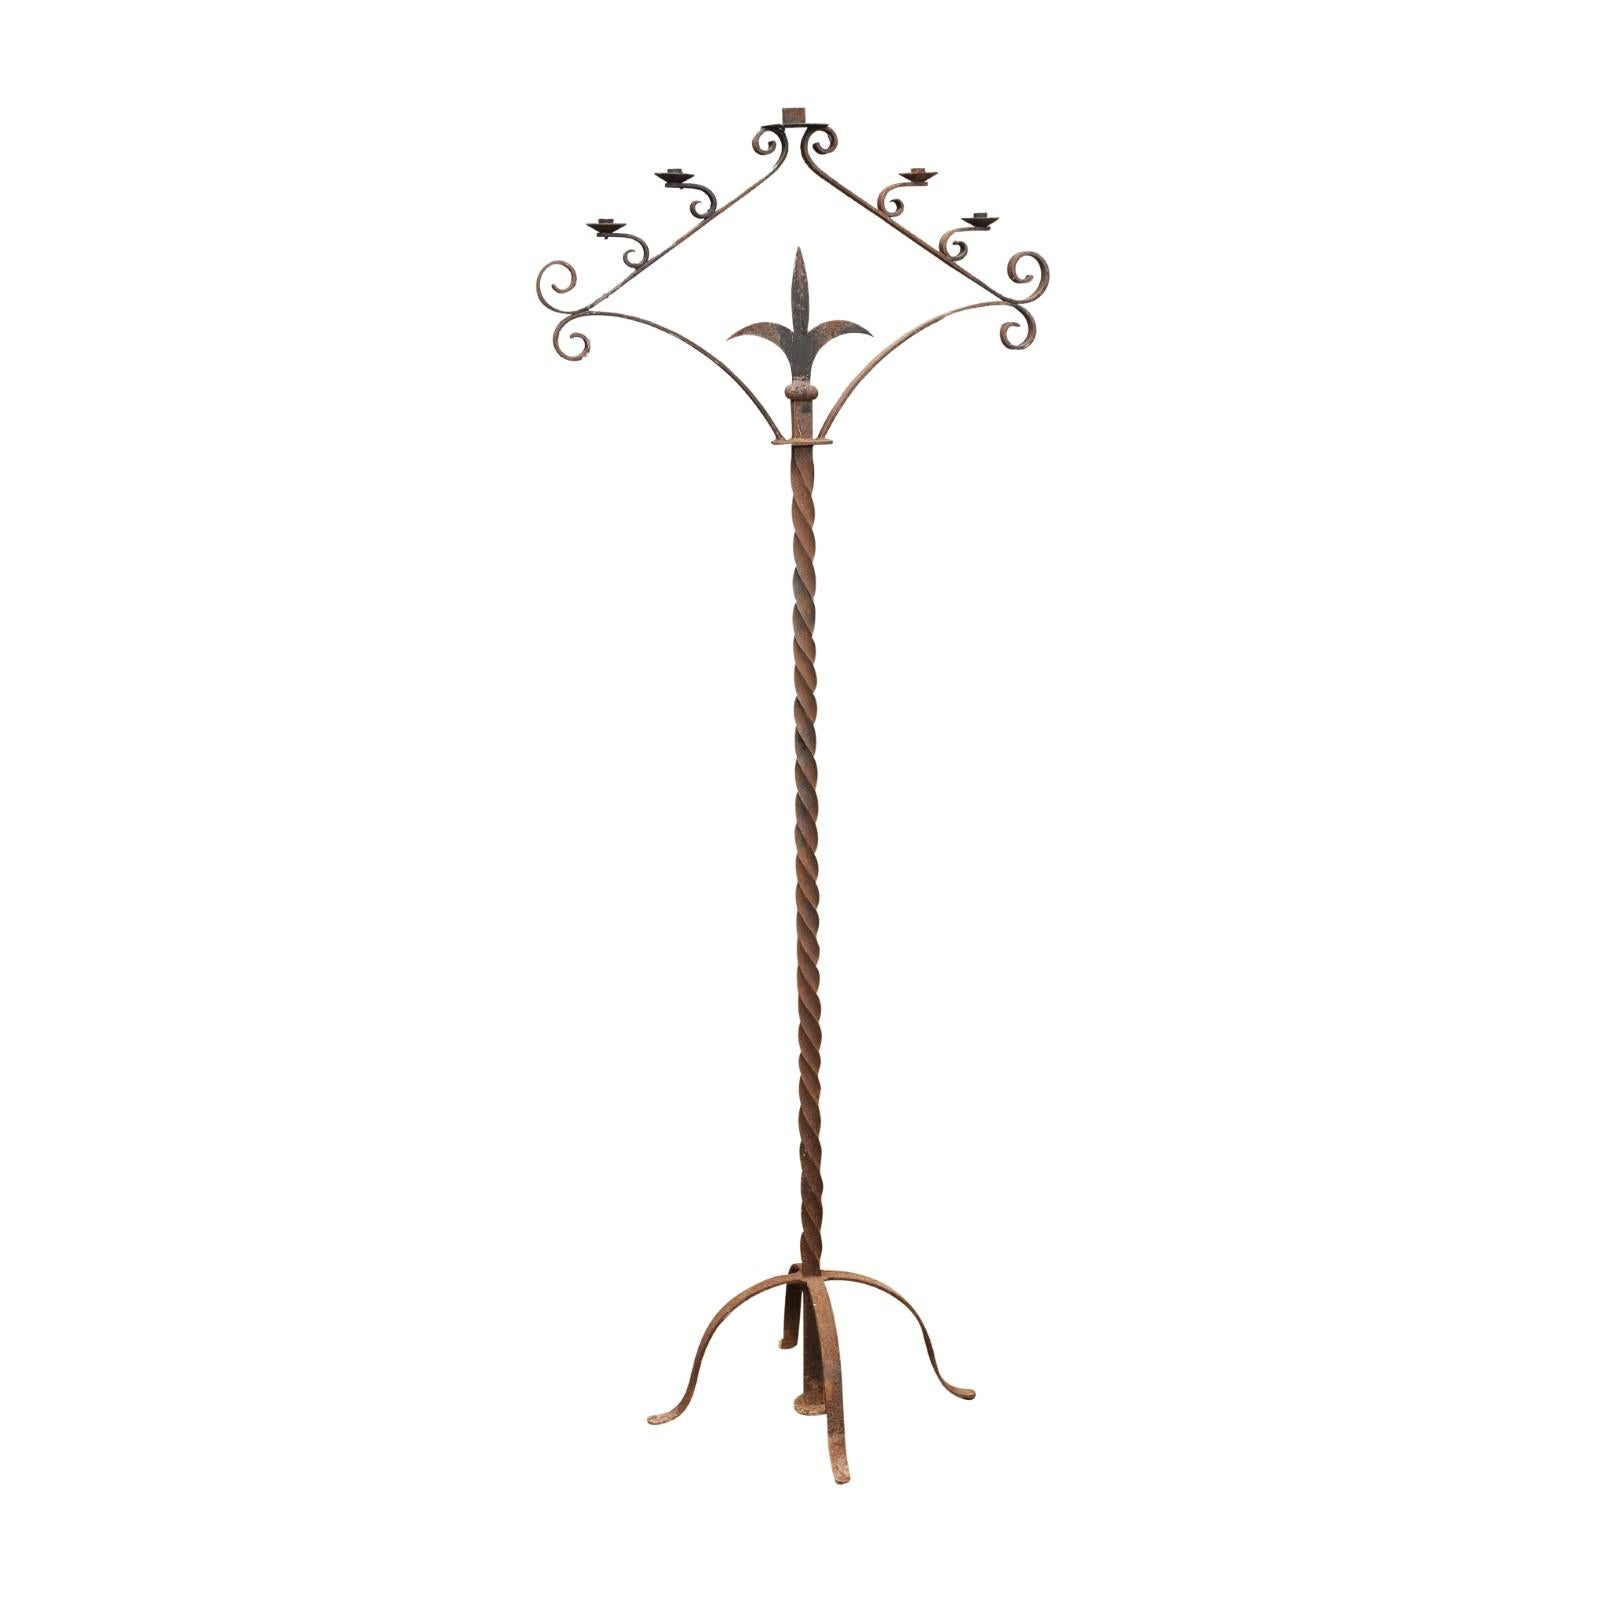 A tall French iron floor standing candelabra from the early 20th century, with five prickets, scrollwork design, stylized fleur de lys motif and twisted accents on a quadripartite base. Created in France at the Turn of the Century (19th to 20th